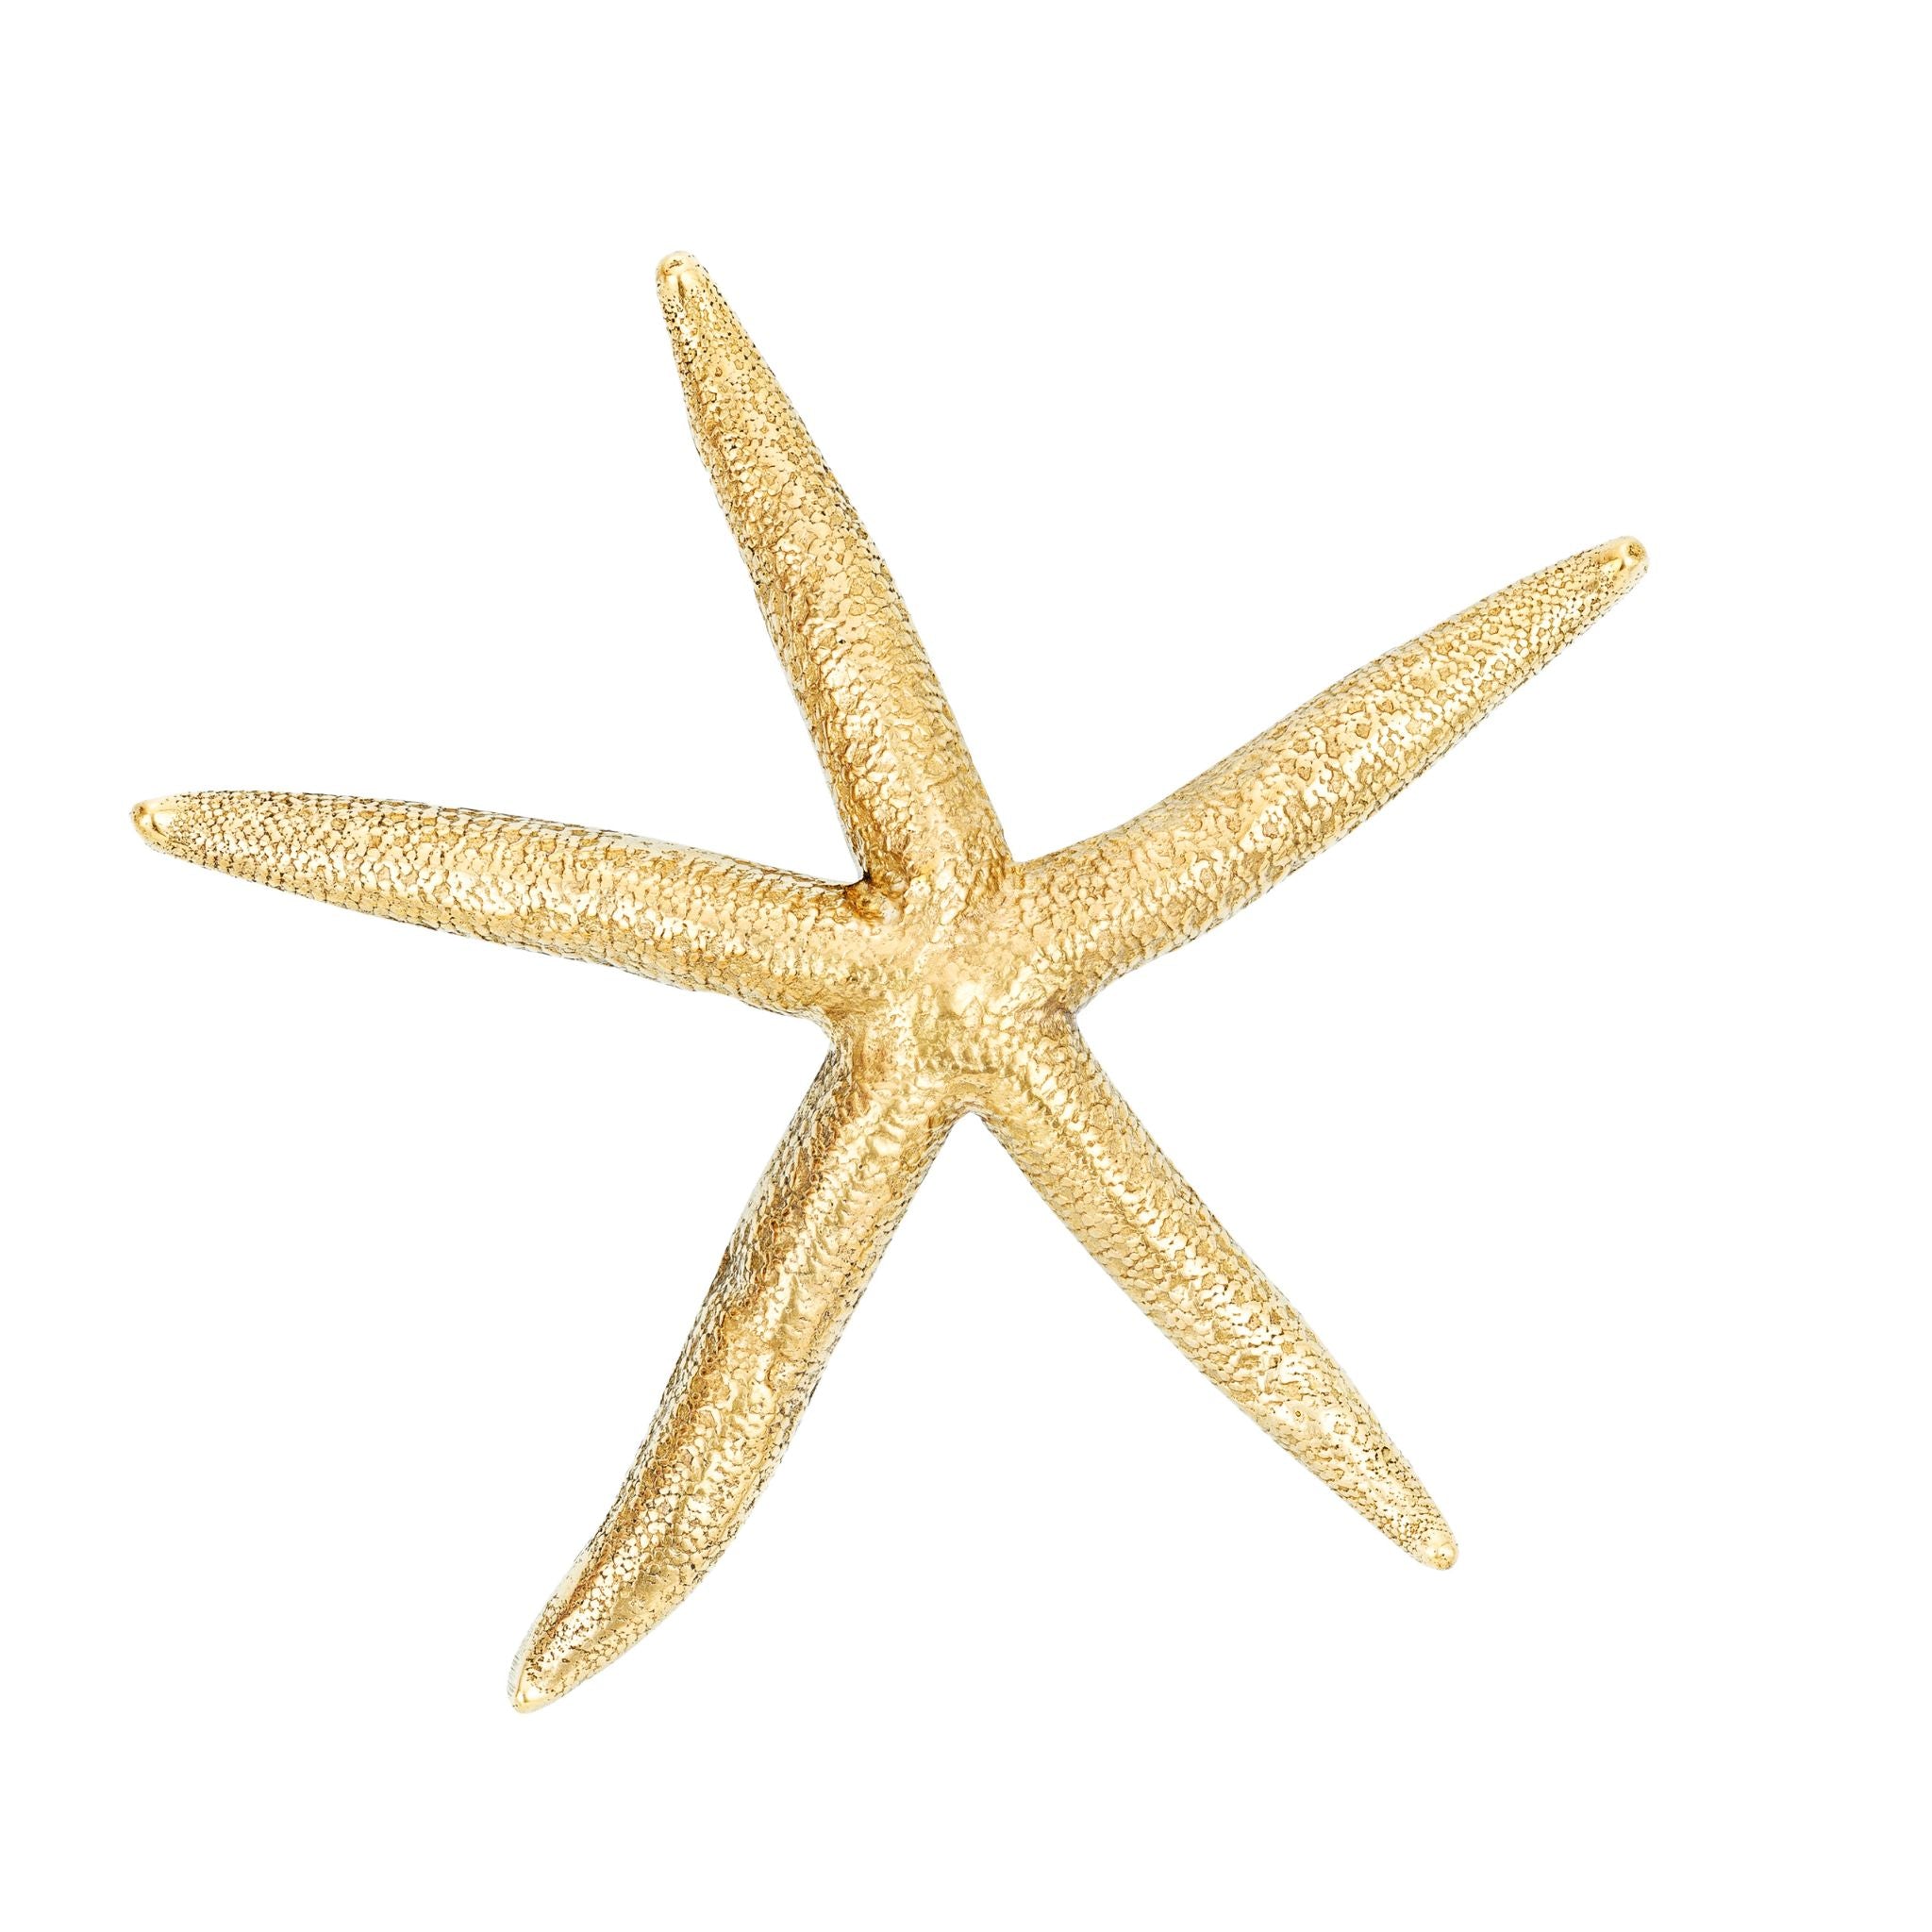 Brass cabinet knob shaped like a starfish, ideal for adding a coastal touch to furniture and cabinets.